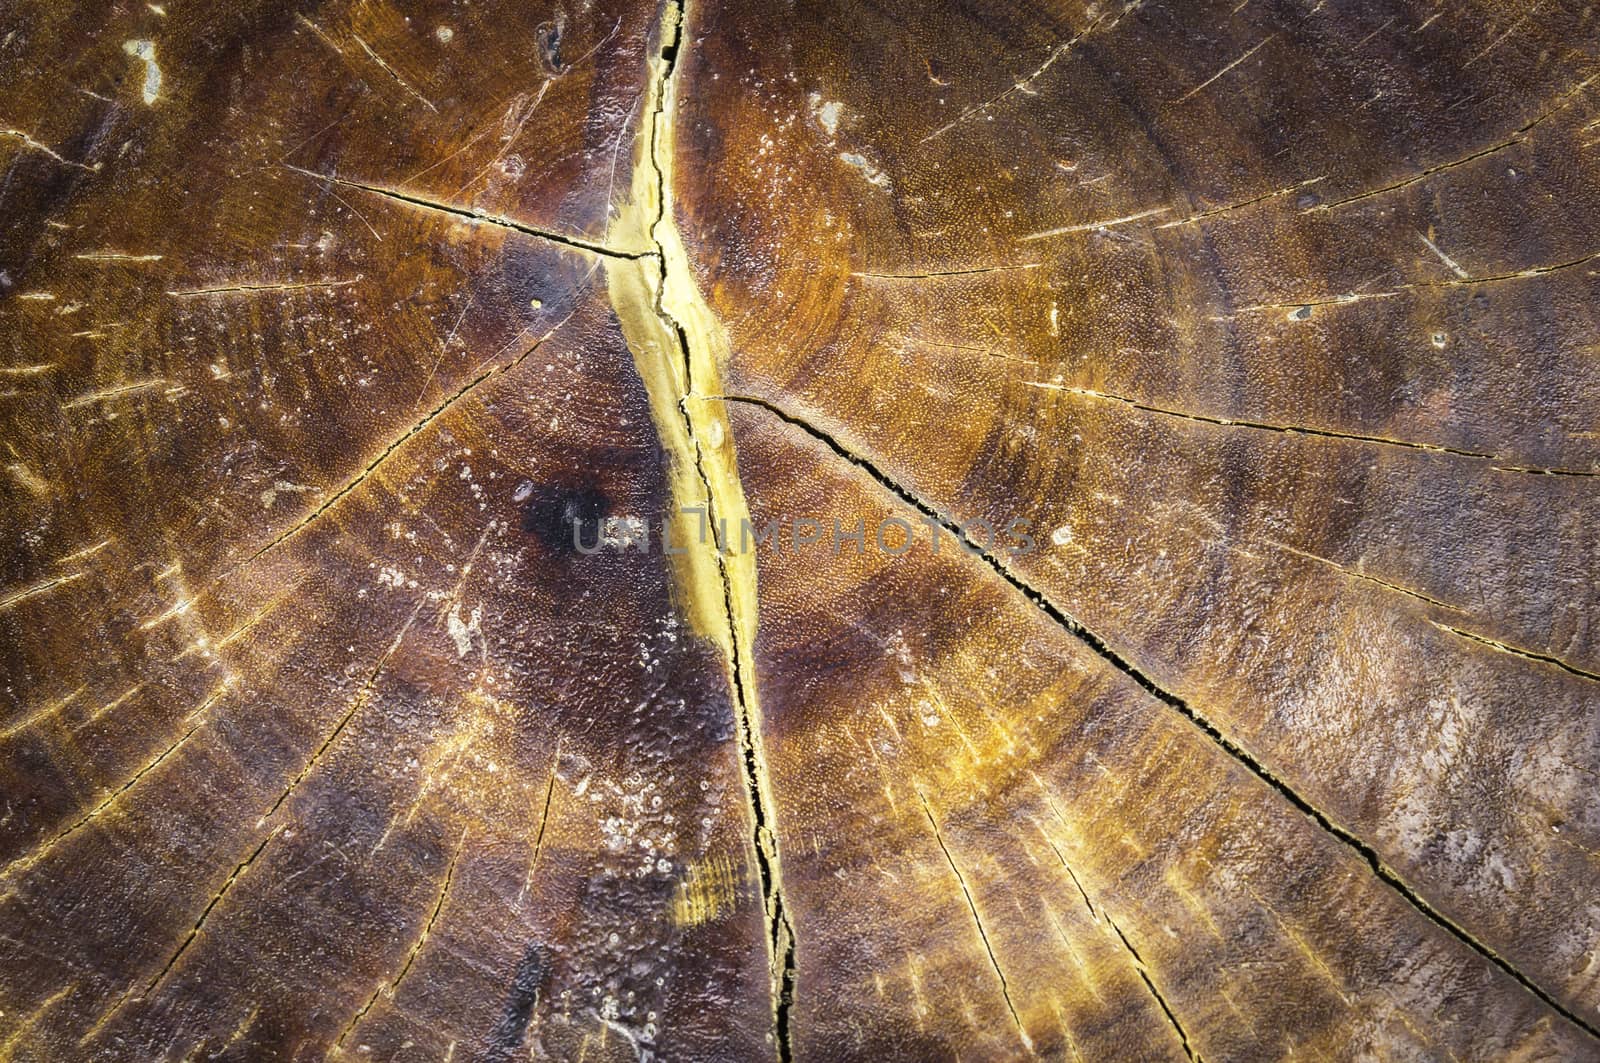 Old stump tree - section of the trunk with annual ring